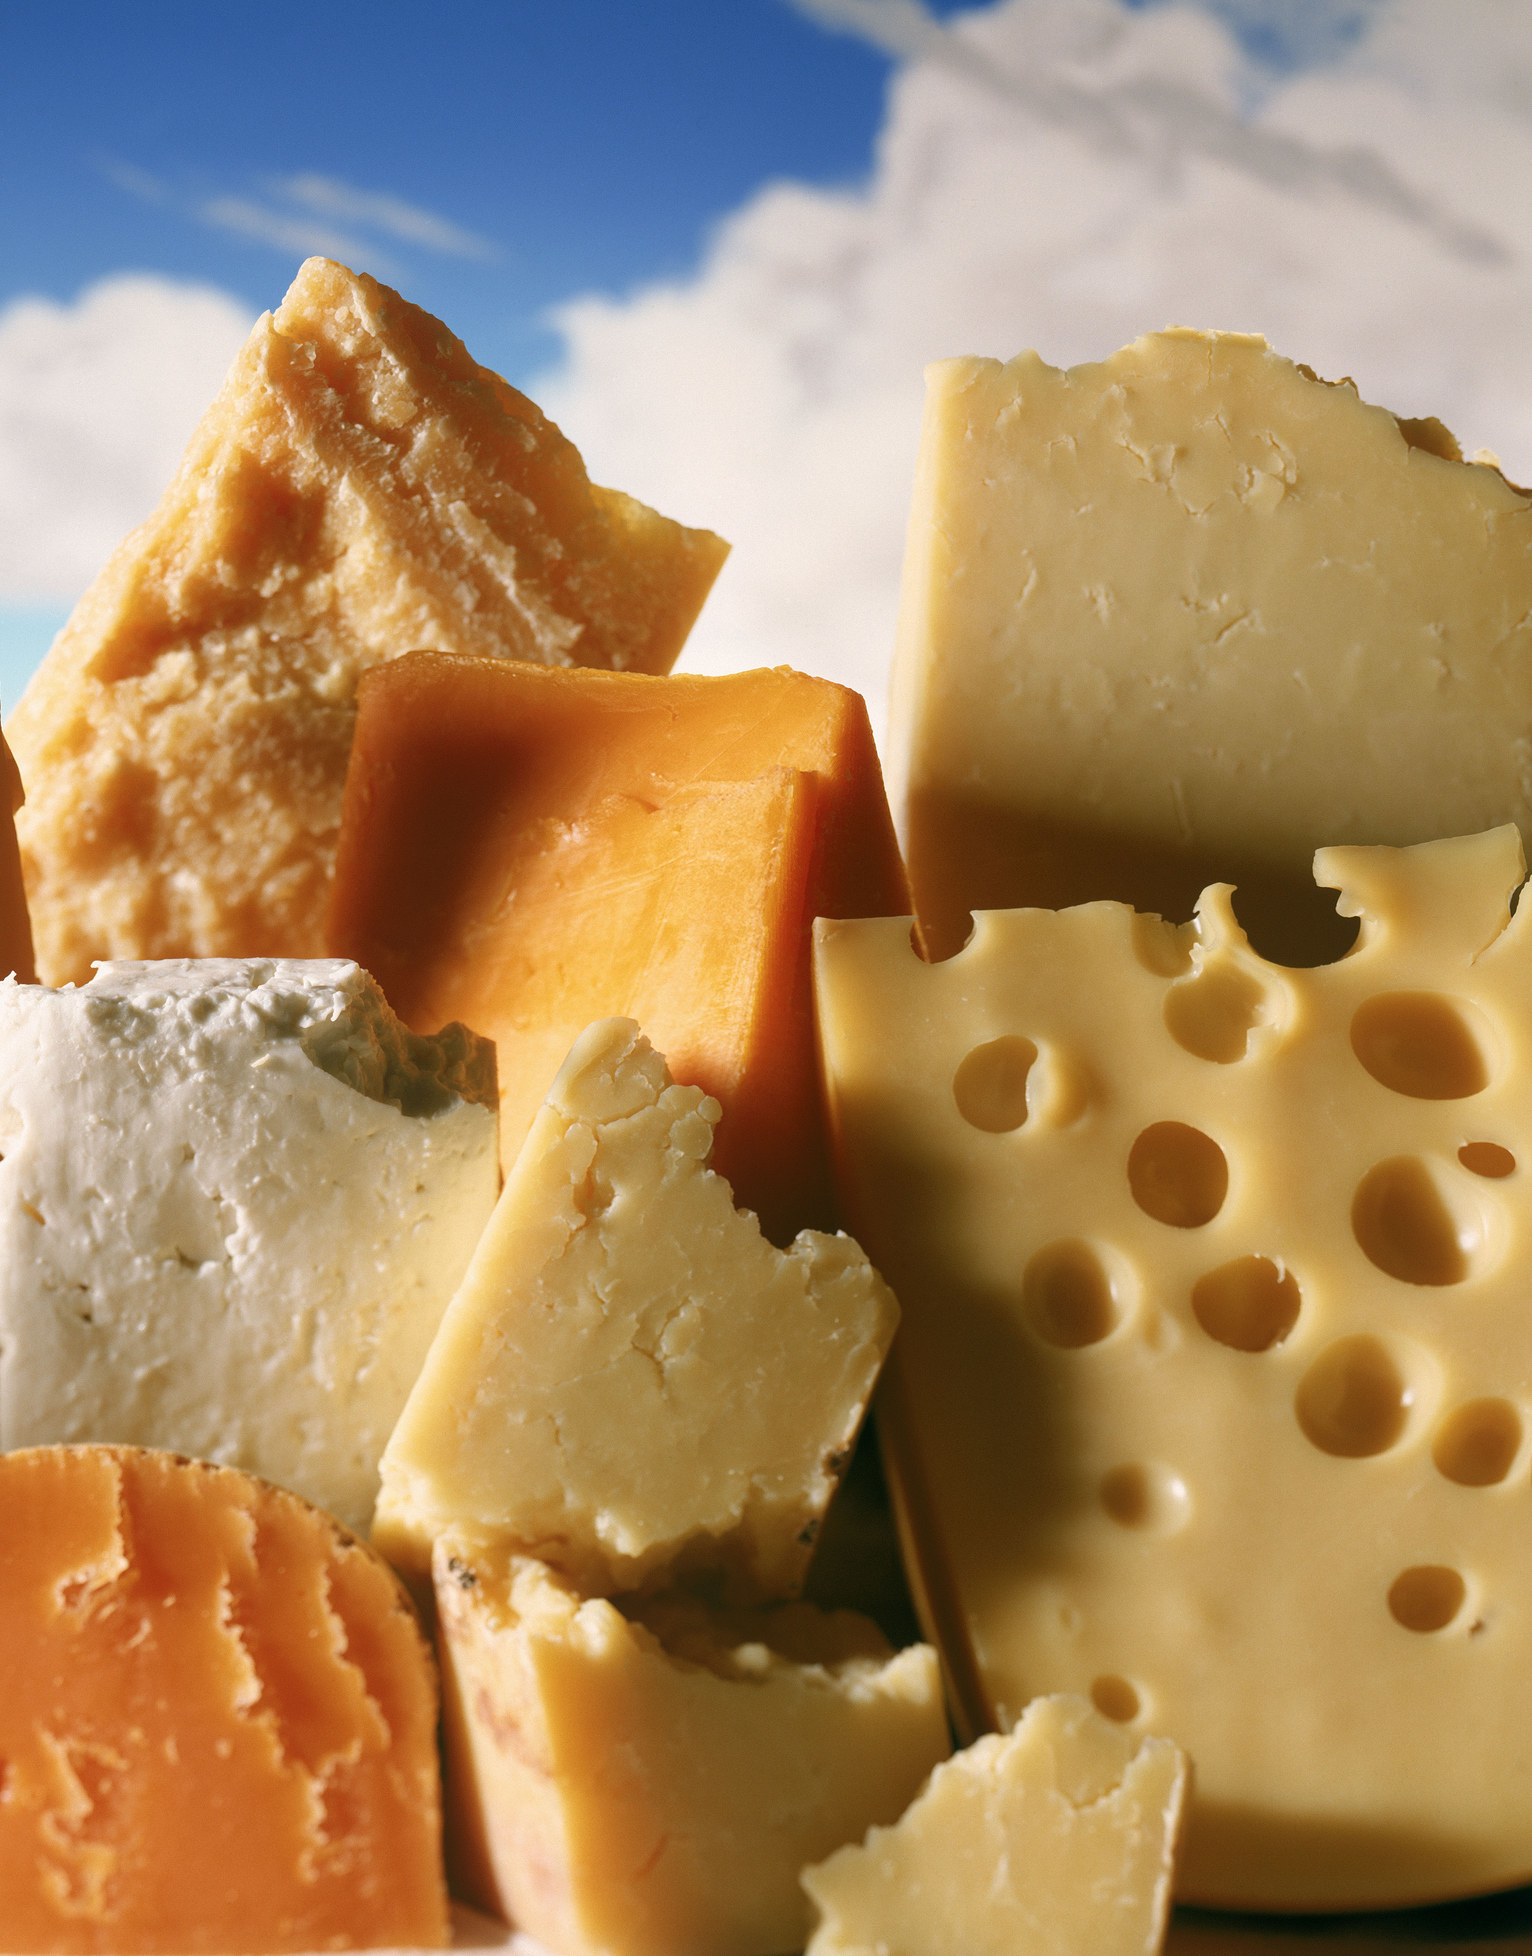 Different types of hard cheeses, including Swiss and Cheddar